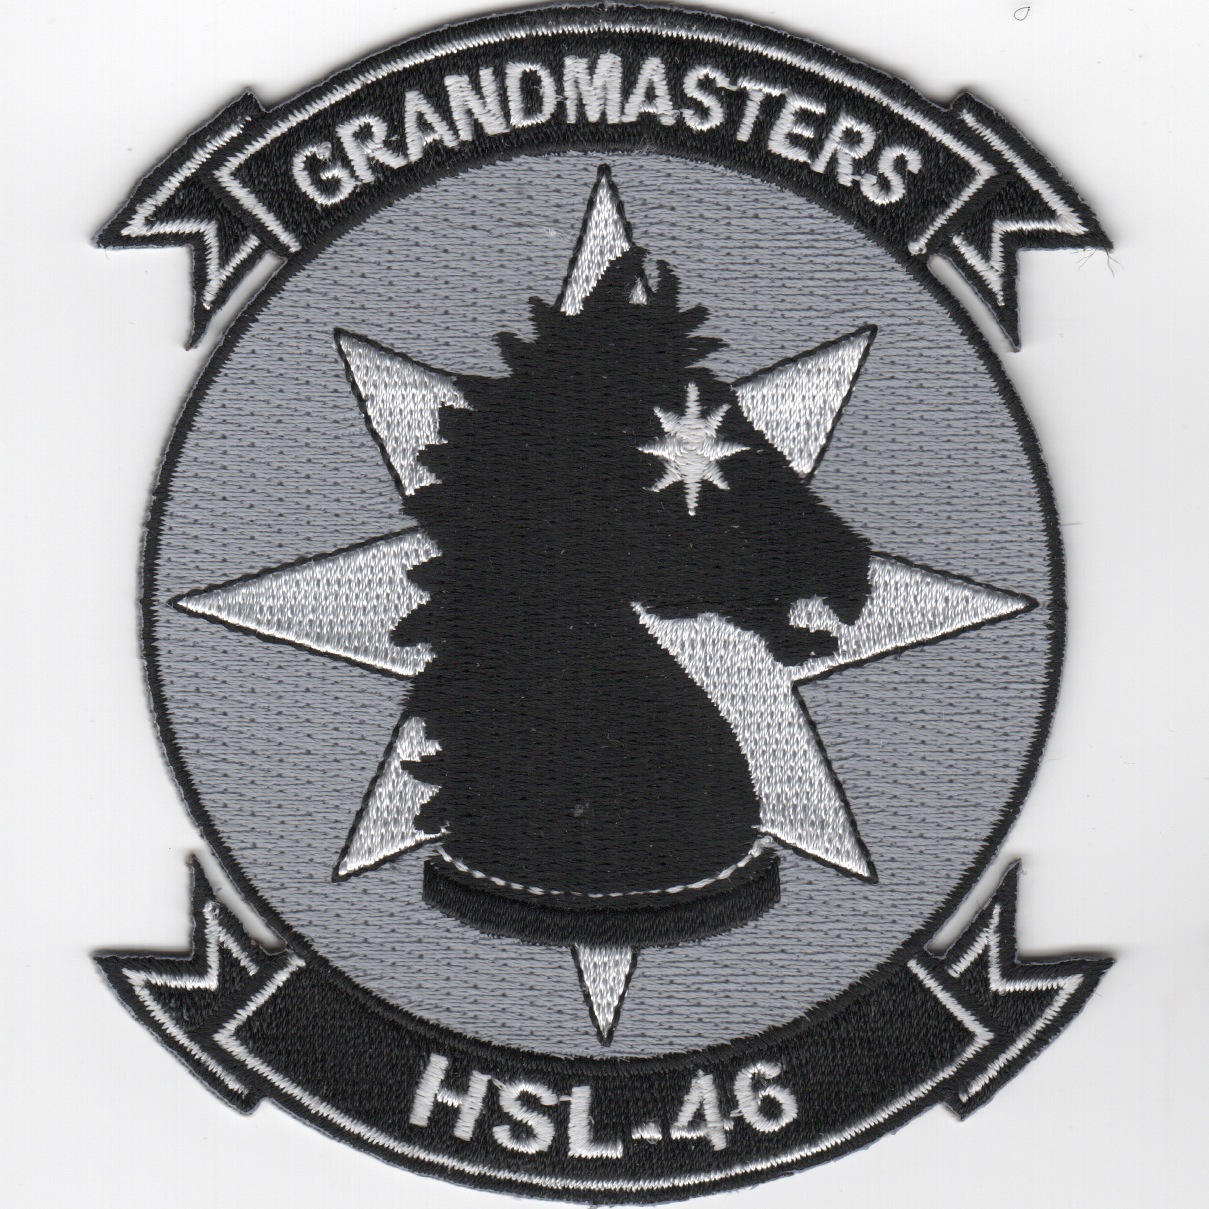 HSL-46 Squadron Patch (Black/Horse Looking Right)